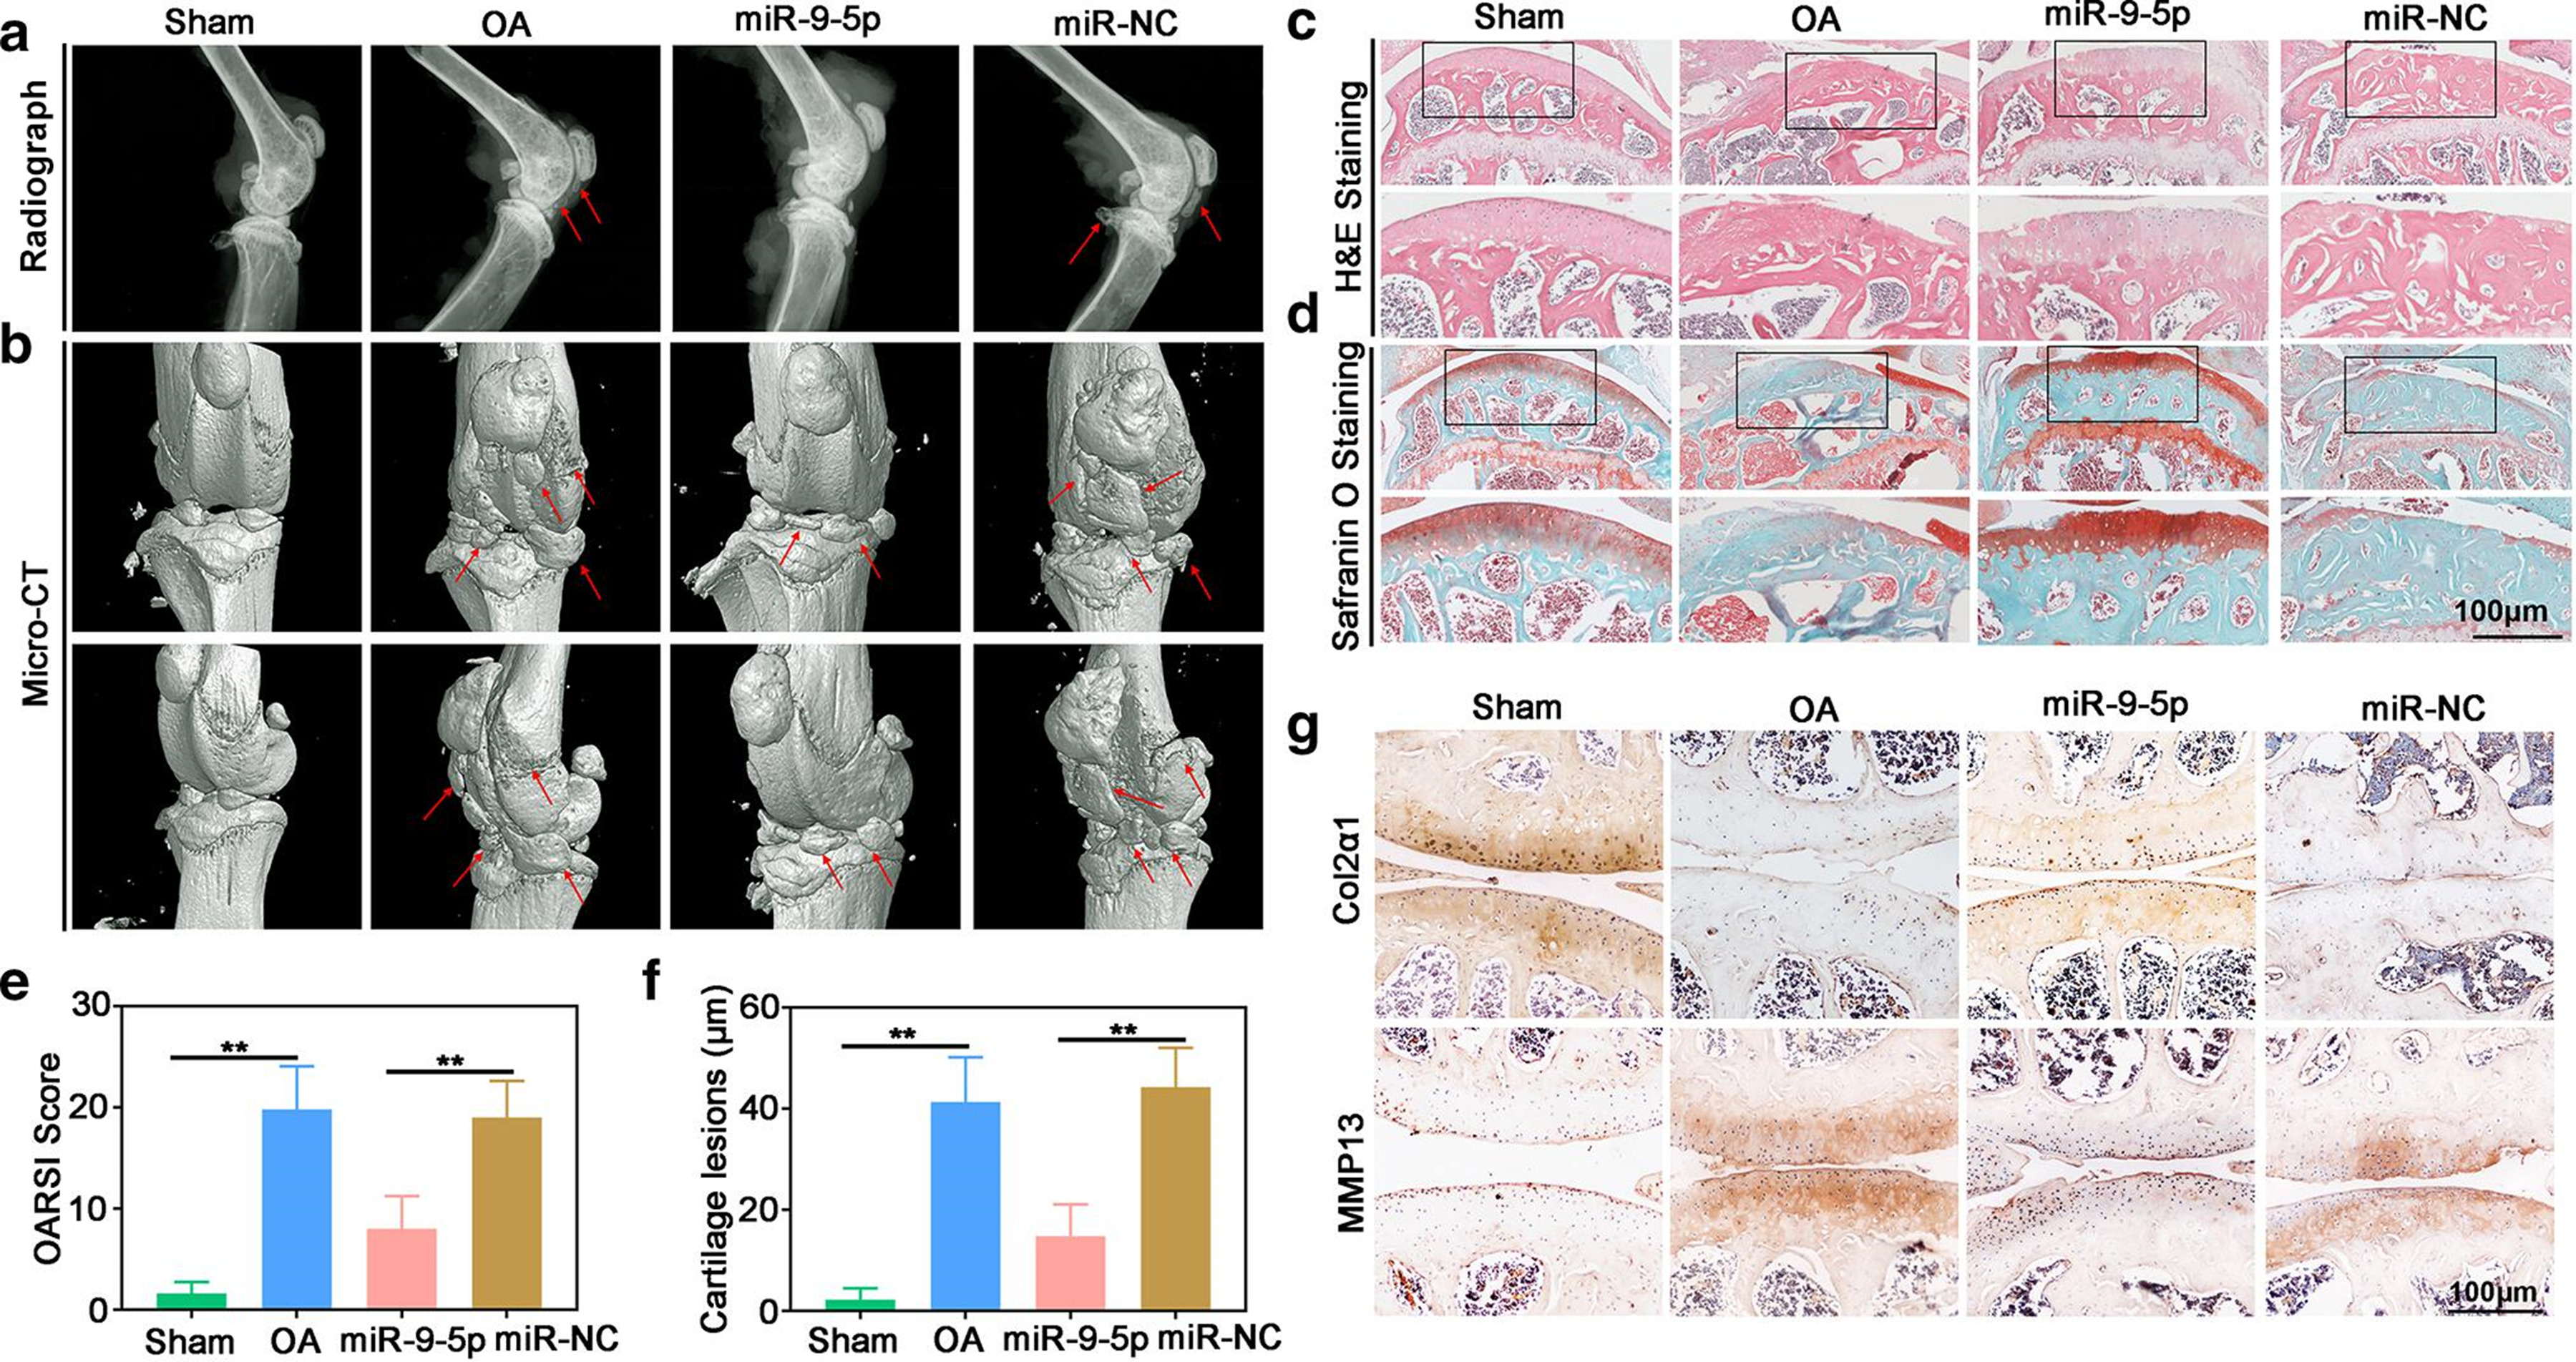 Fig. 7 
            Therapeutic effect of microRNA (miR)-9-5p in destabilized medial meniscus (DMM)-induced osteoarthritis (OA) mice. a) Radiographs and b) micro-CT imaging for morphological structure in knee of OA mouse at 12 weeks post-DMM surgery, followed by treatment with intra-articular (IA) injection of exosomes with high miR-9-5p expression and miRNA-NC, respectively (n = 4). c) and d) Haematoxylin and eosin (H&E) staining and Safranin-O/Fast Green staining of articular cartilage tissues of OA mouse at 12 weeks post-DMM surgery, followed by treatment with IA injection of exosomes with high miR-9-5p expression and miRNA-NC, respectively (n = 4; scale bar: 100 μm). e) and f) Results of Safranin-O/Fast Green staining of e) Osteoarthritis Research Society International (OARSI) score and f) depth of cartilage lesions (n = 4). g) Immunohistochemistry staining showed the intensity of immunostaining of COL2α1 and matrix metalloproteinase (MMP)-13 of OA mouse at 12 weeks post-DMM surgery, followed by treatment with IA injection of exosomes with high miR-9-5p expression and miRNA-NC, respectively (n = 4; scale bar: 100 μm). Independent-samples t-test was used to compare data between two groups, and one-way analysis of variance was used for comparison between multiple groups. NC, negative control.
          